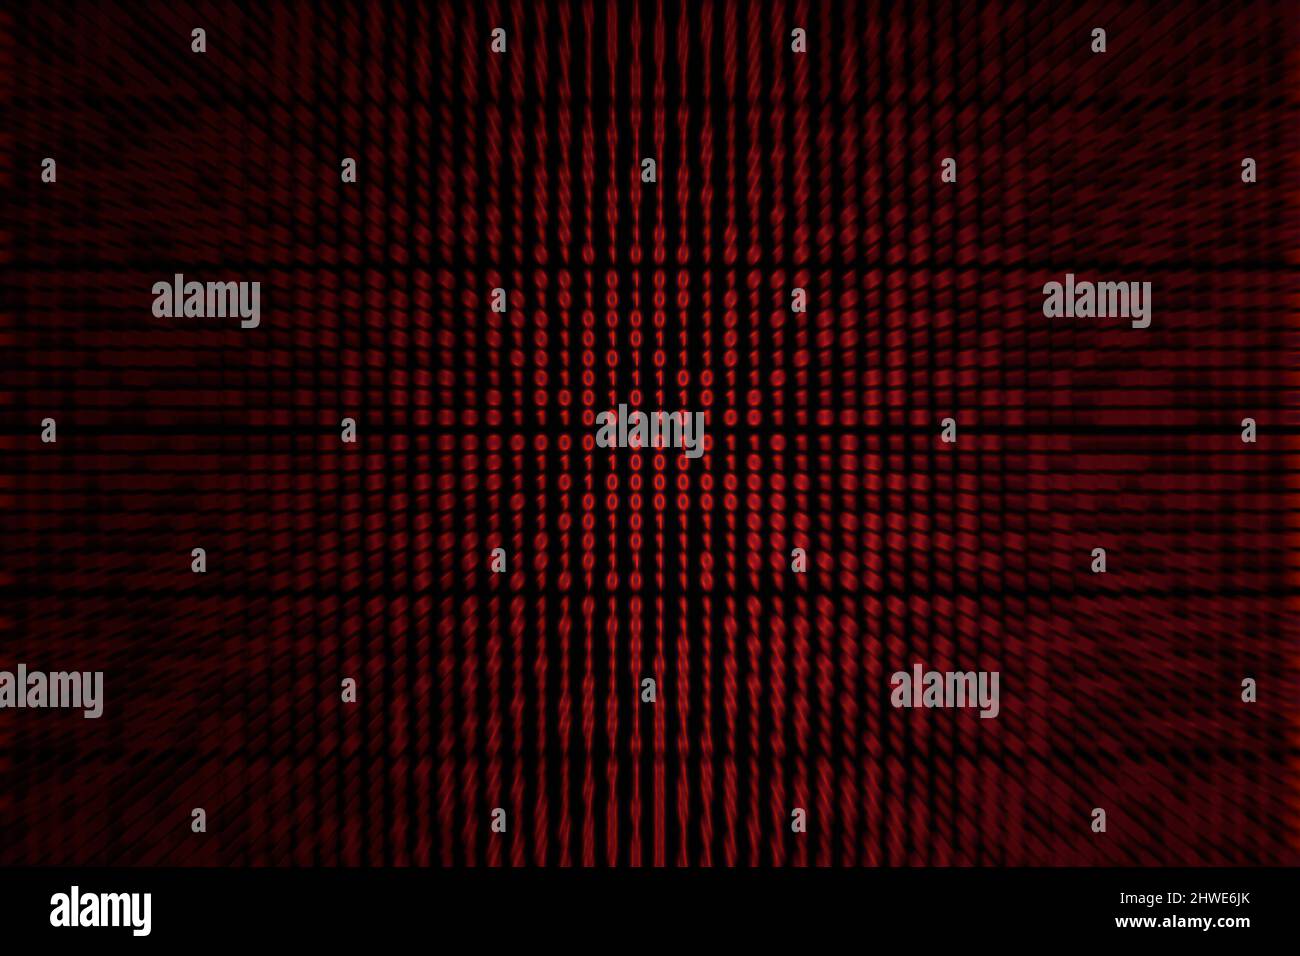 Zoom in on a red binary code background. Stock Photo